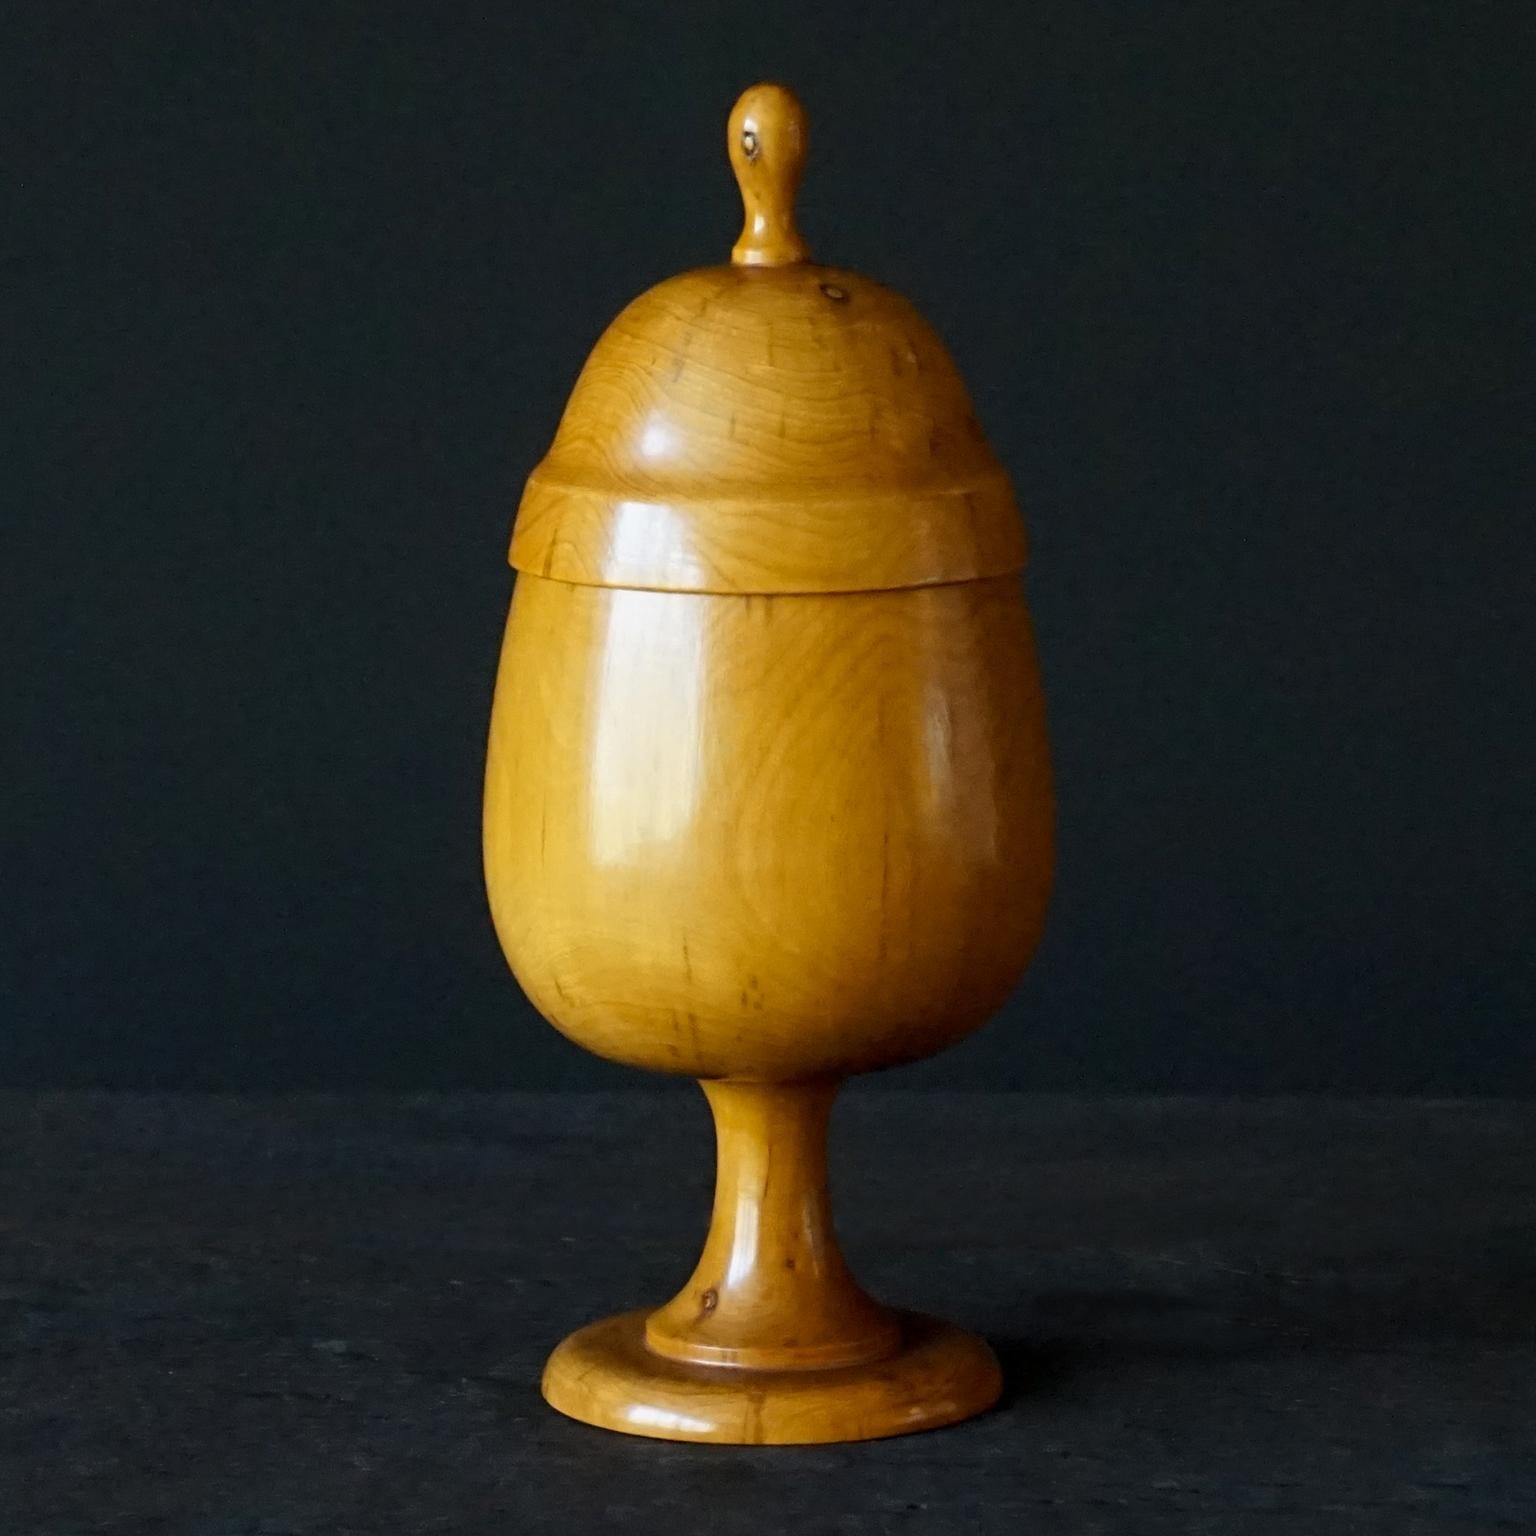 19th Century antique medical apothecary pharmacy turned treen boxwood pill gilder. 

Egg or aubergine shaped boxwood turned lidded cup on a stand.
The cup and stand are made from one piece of wood, so is the lid with knob.

Pill silverers or